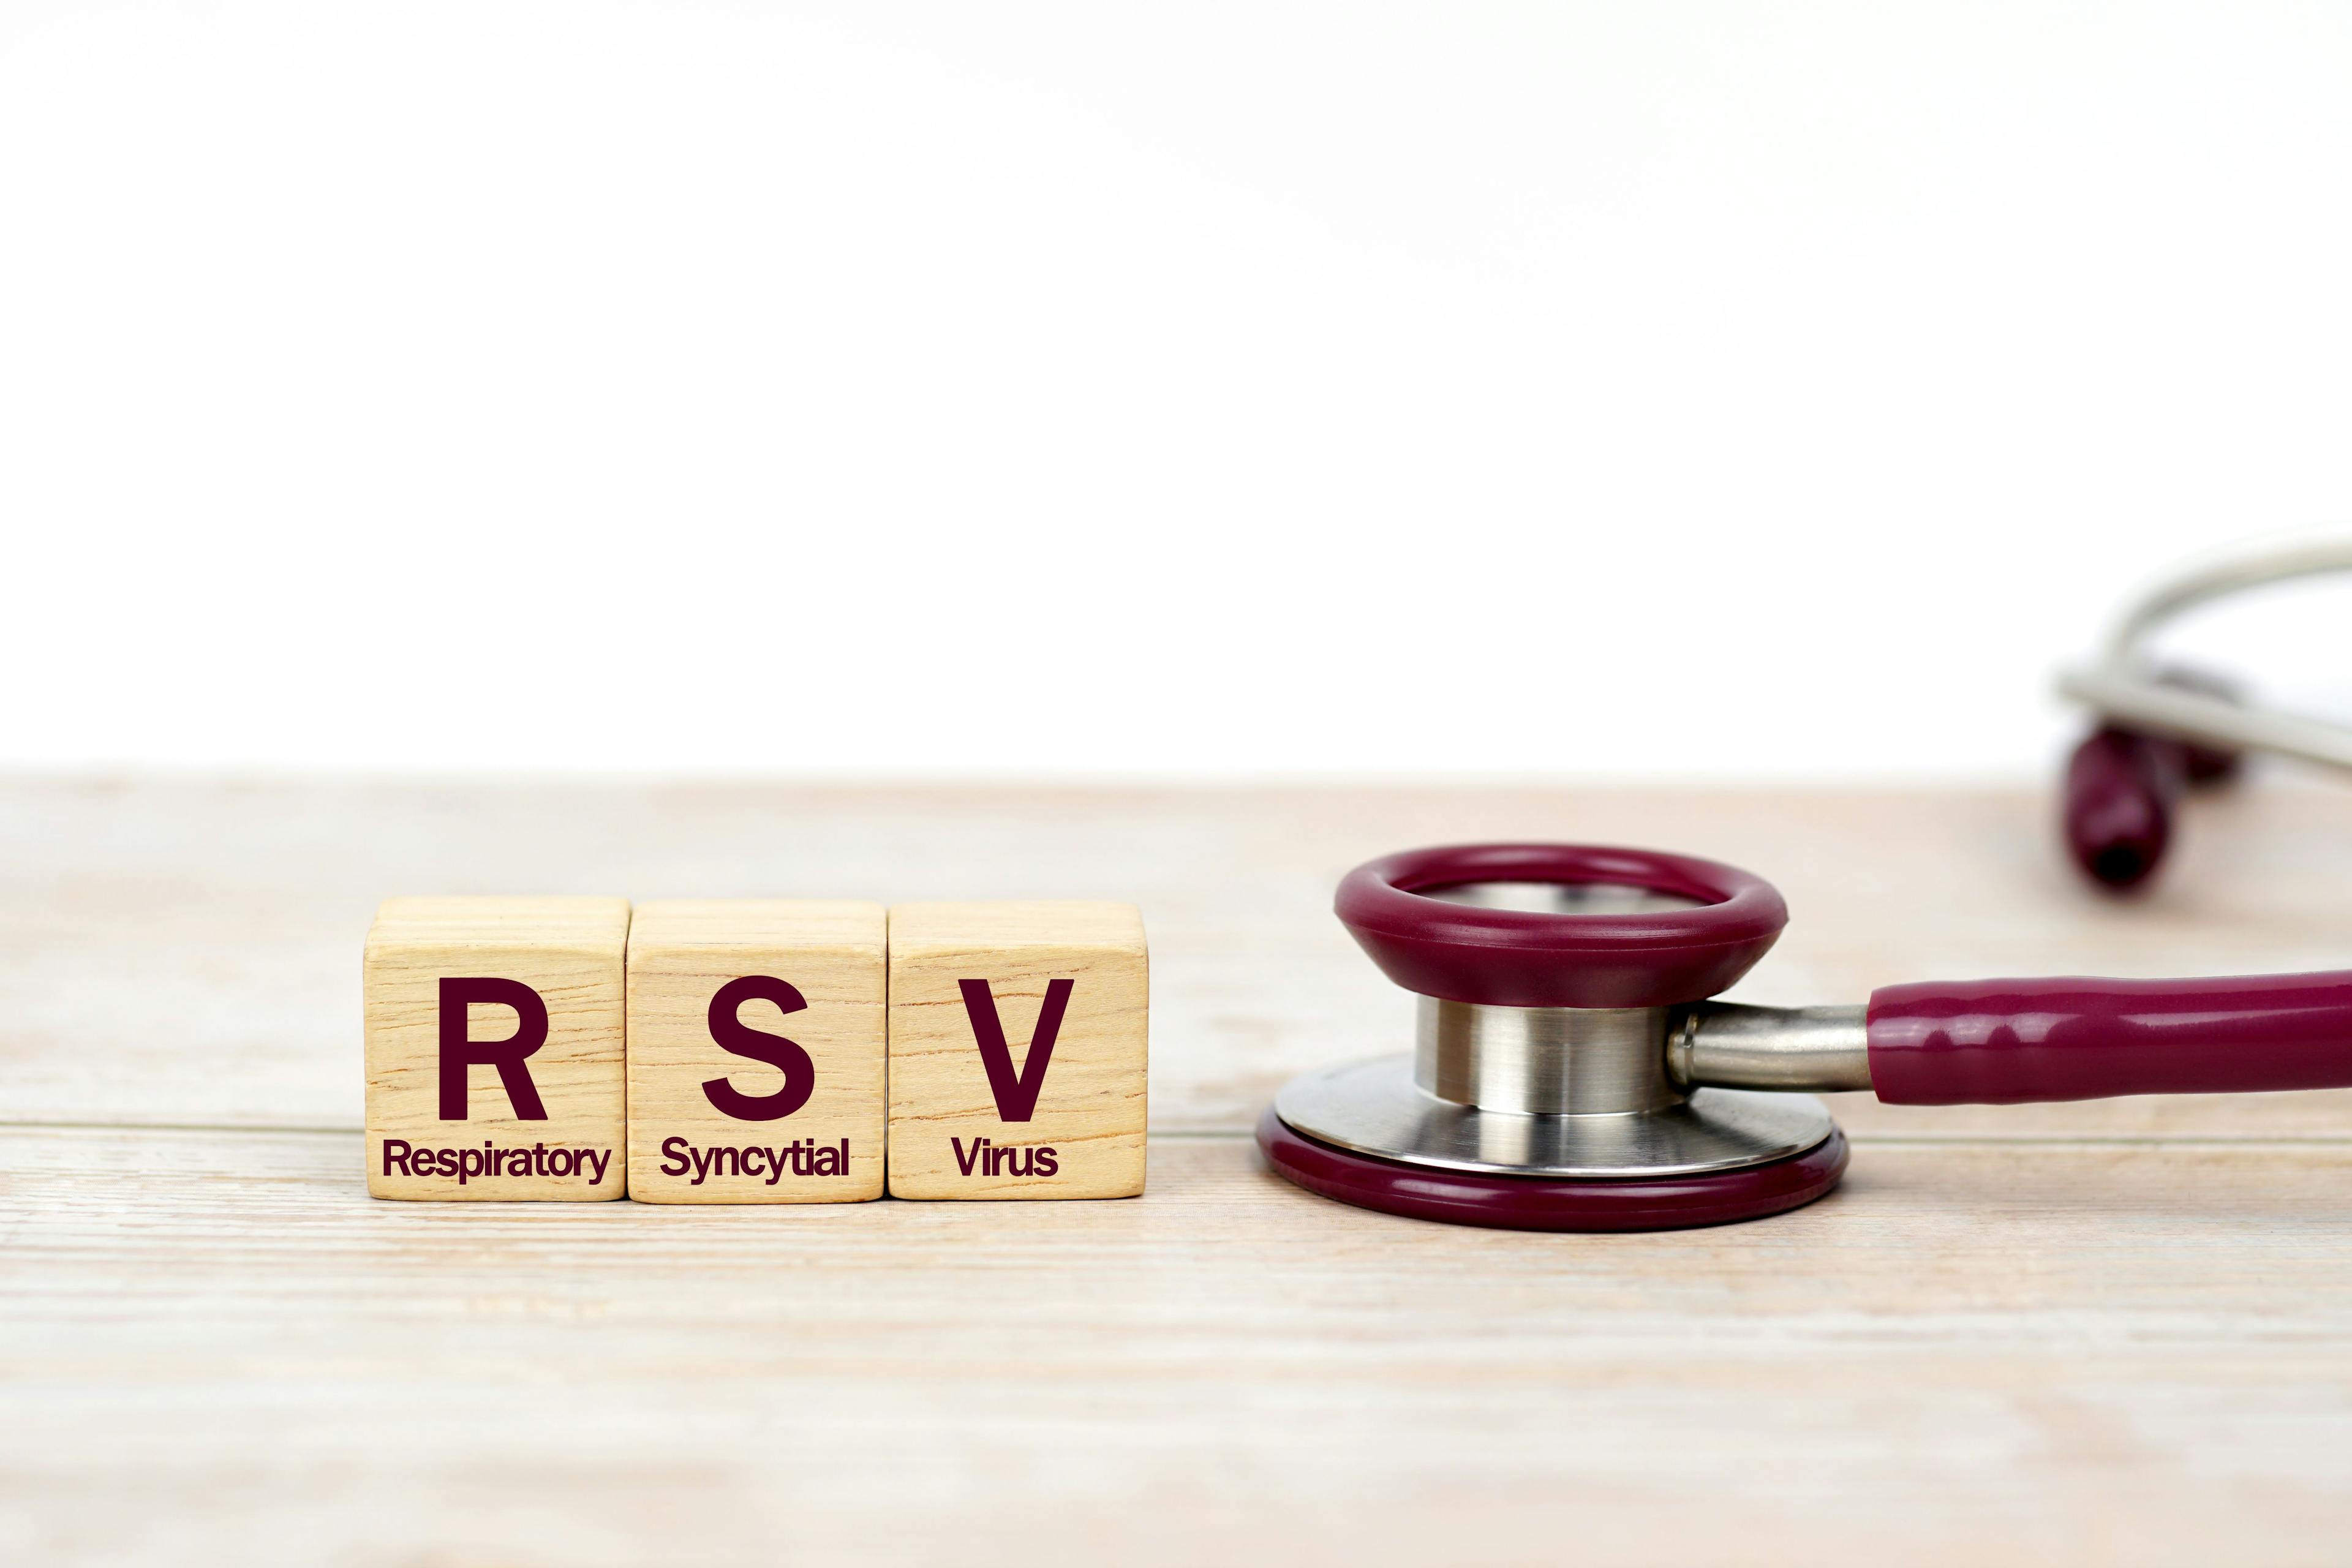 Word Respiratory Syncytial Virus (RSV) on wooden blocks and stethoscope on the wooden table with white background for copy space. Medical diagnosis and investigation technology concept - Image credit: surasak | stock.adobe.com